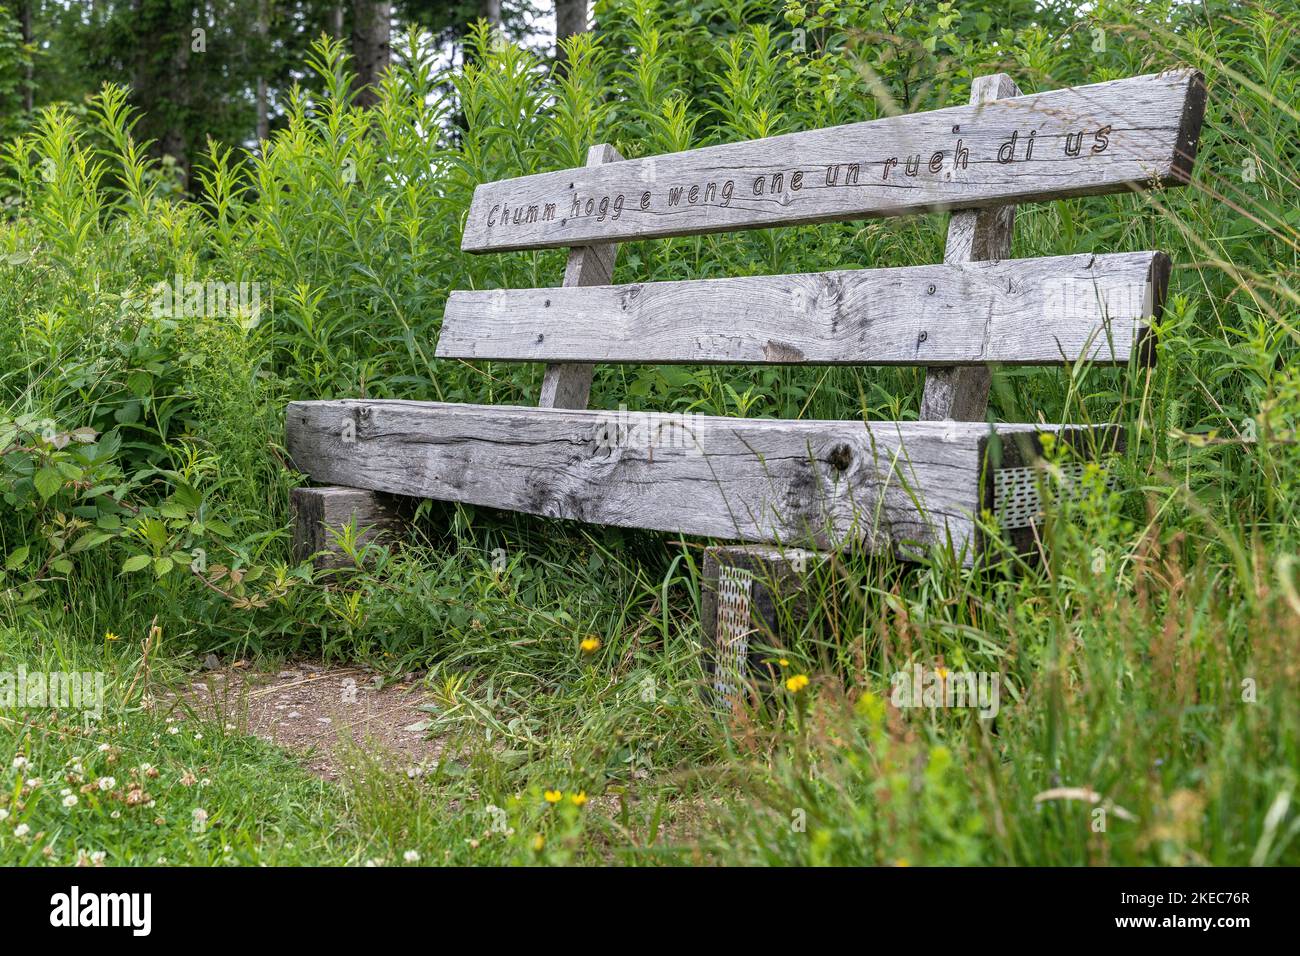 Europe, Germany, Southern Germany, Baden-Wuerttemberg, Black Forest, wooden bench with saying in dialect in southern Black Forest Stock Photo